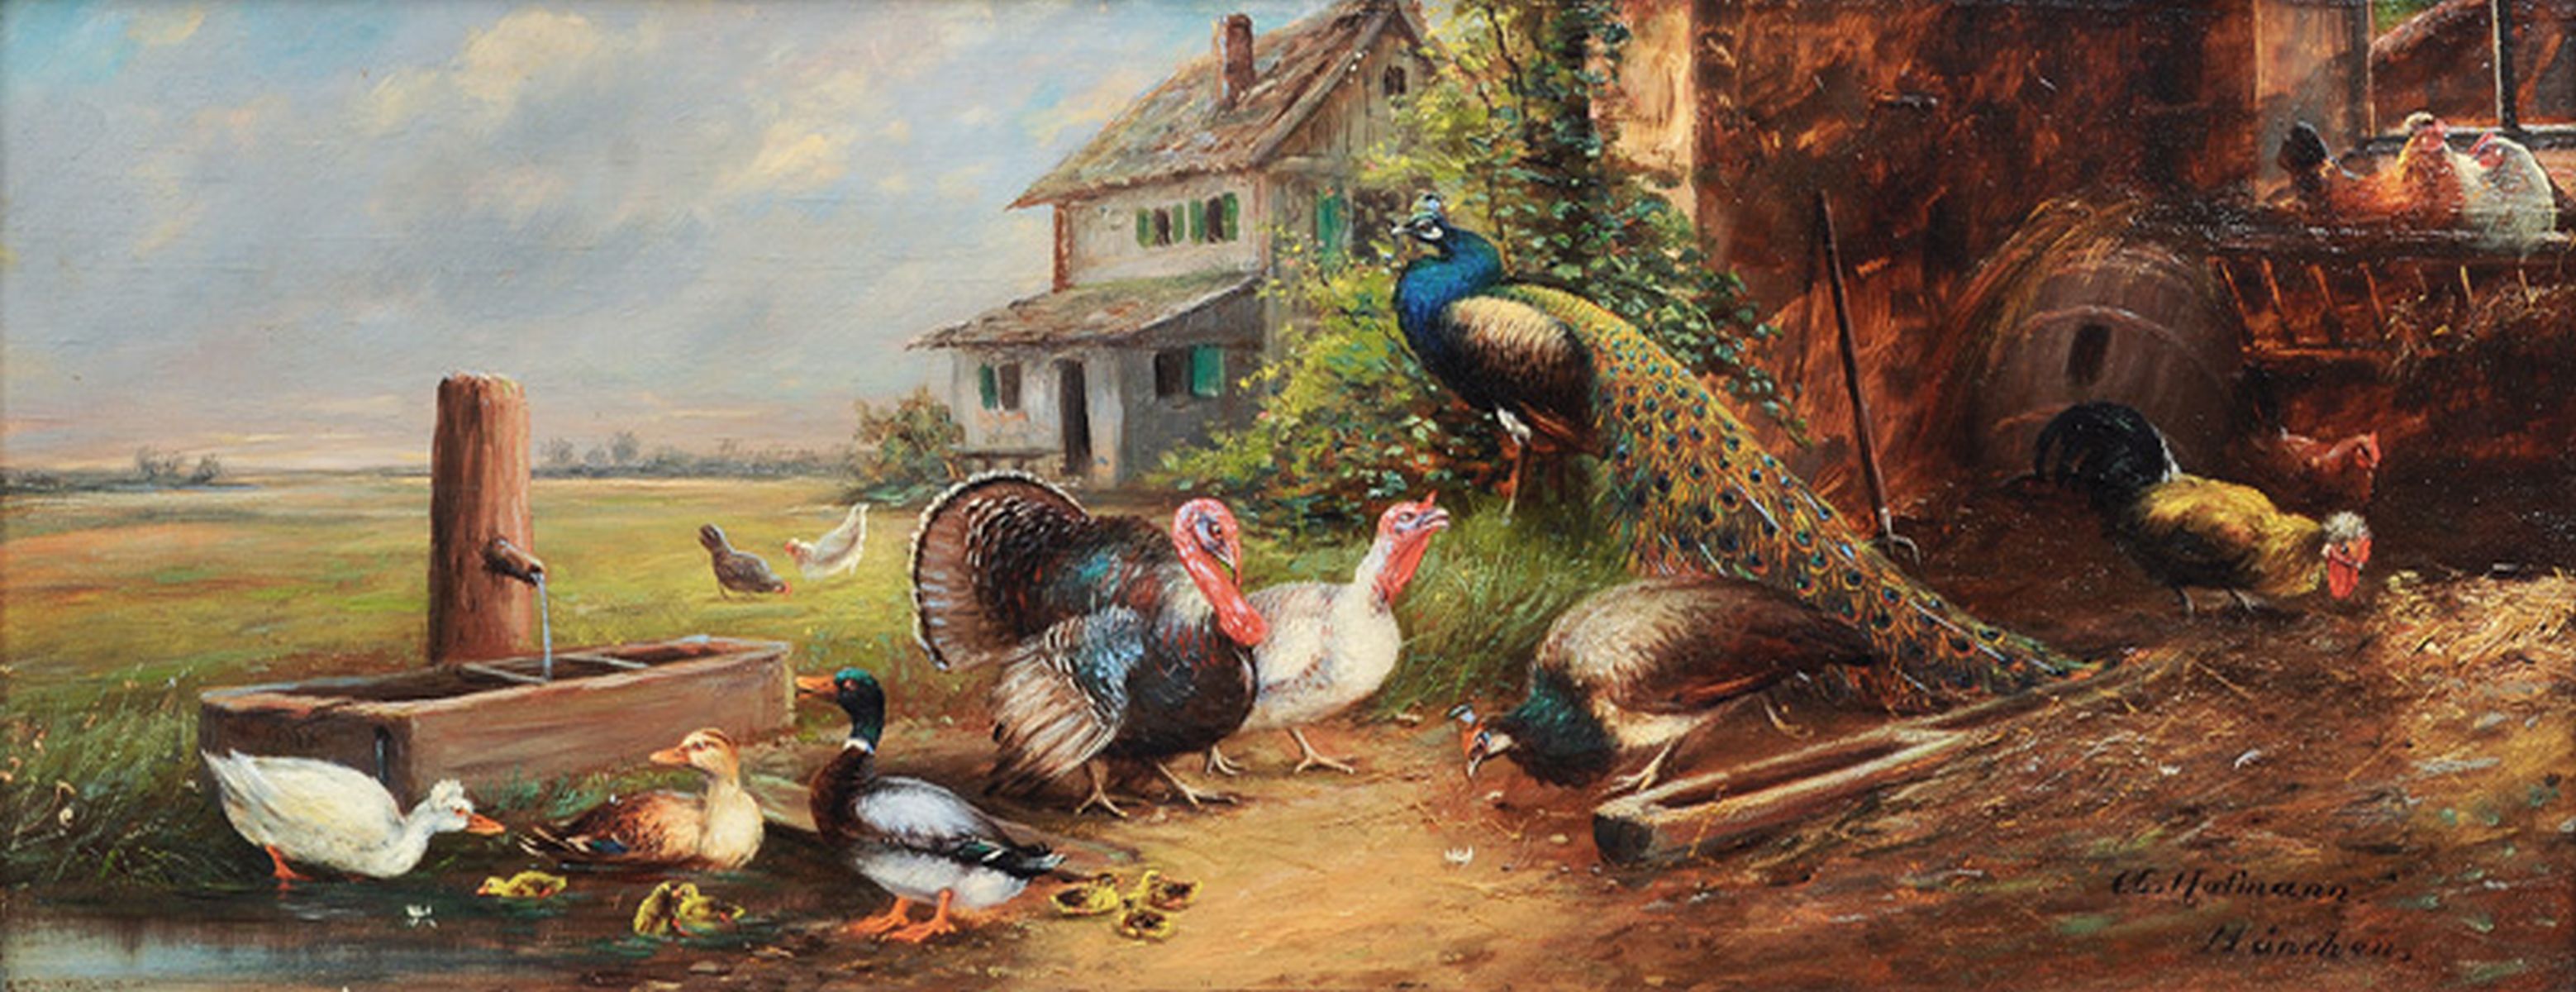 Poultry in a Yard